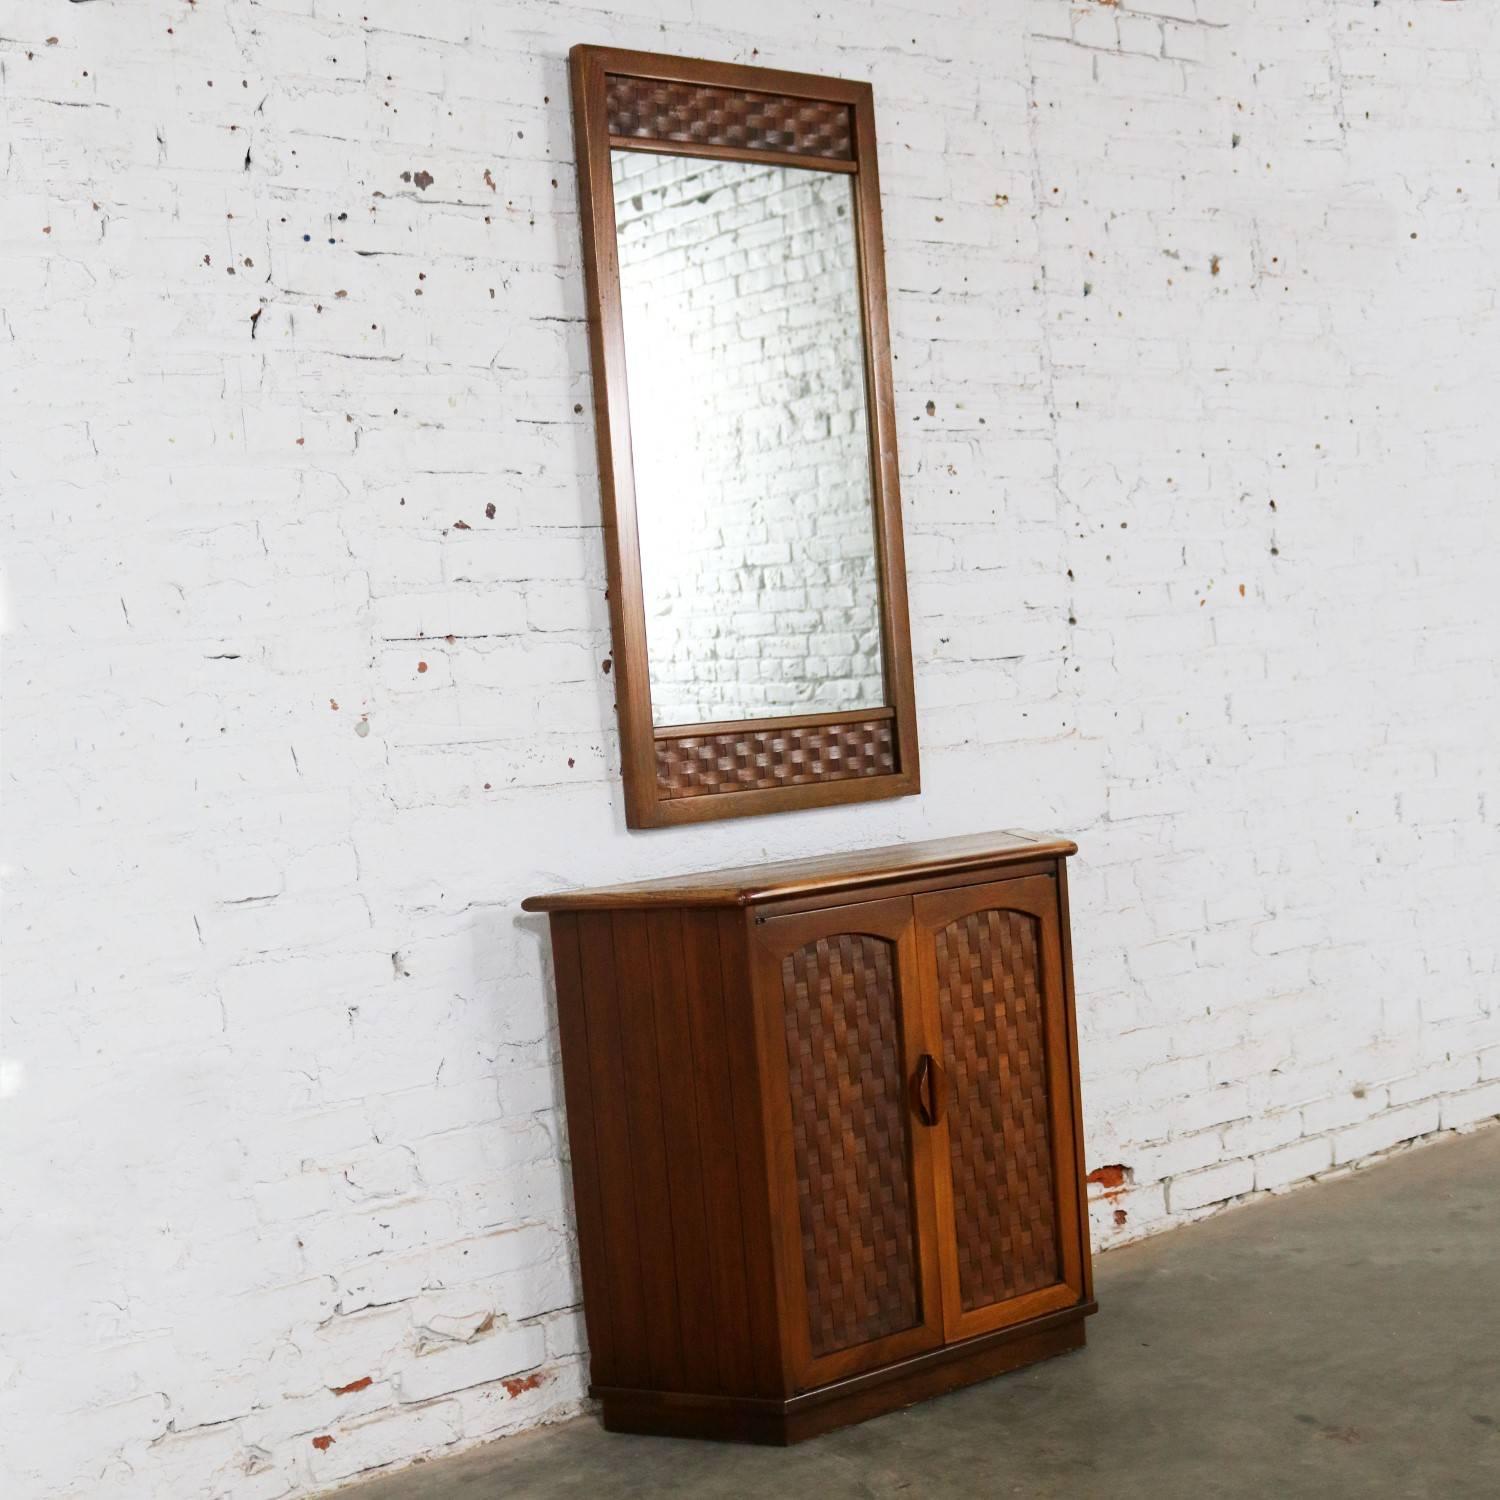 Handsome two-piece set comprised of an entry console cabinet and matching mirror with basket weave detail done in the style of Lane Furniture from their Perception line designed by Warren C. Church. These pieces do not have a Lane tag or mark. The